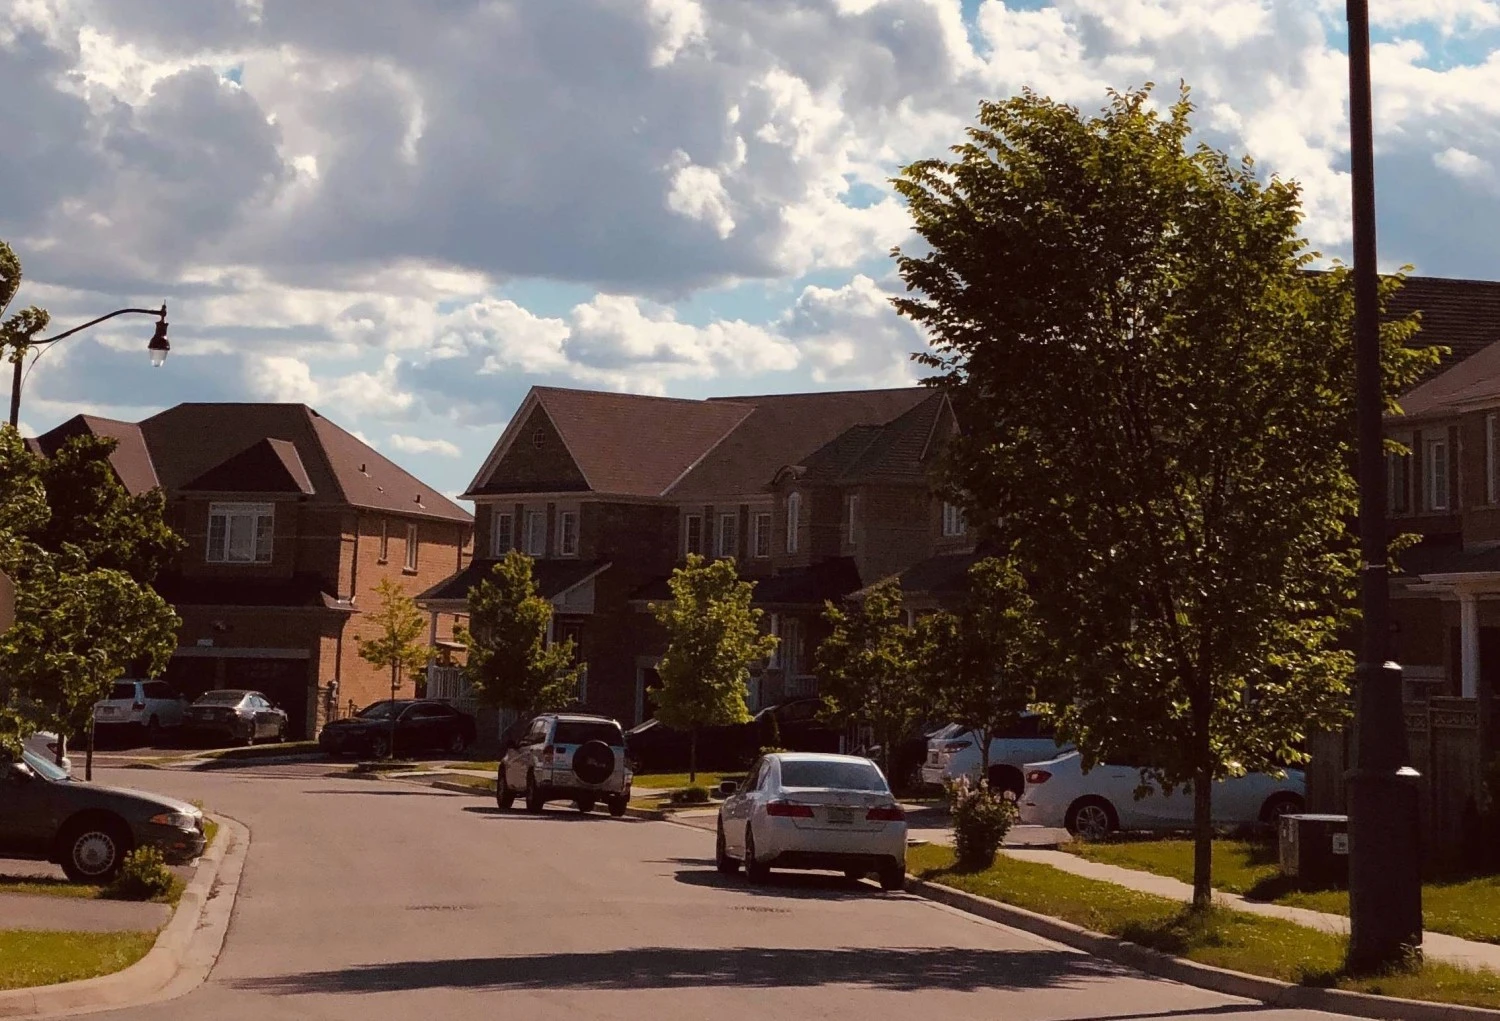 Is Brampton a Good Place To Live?